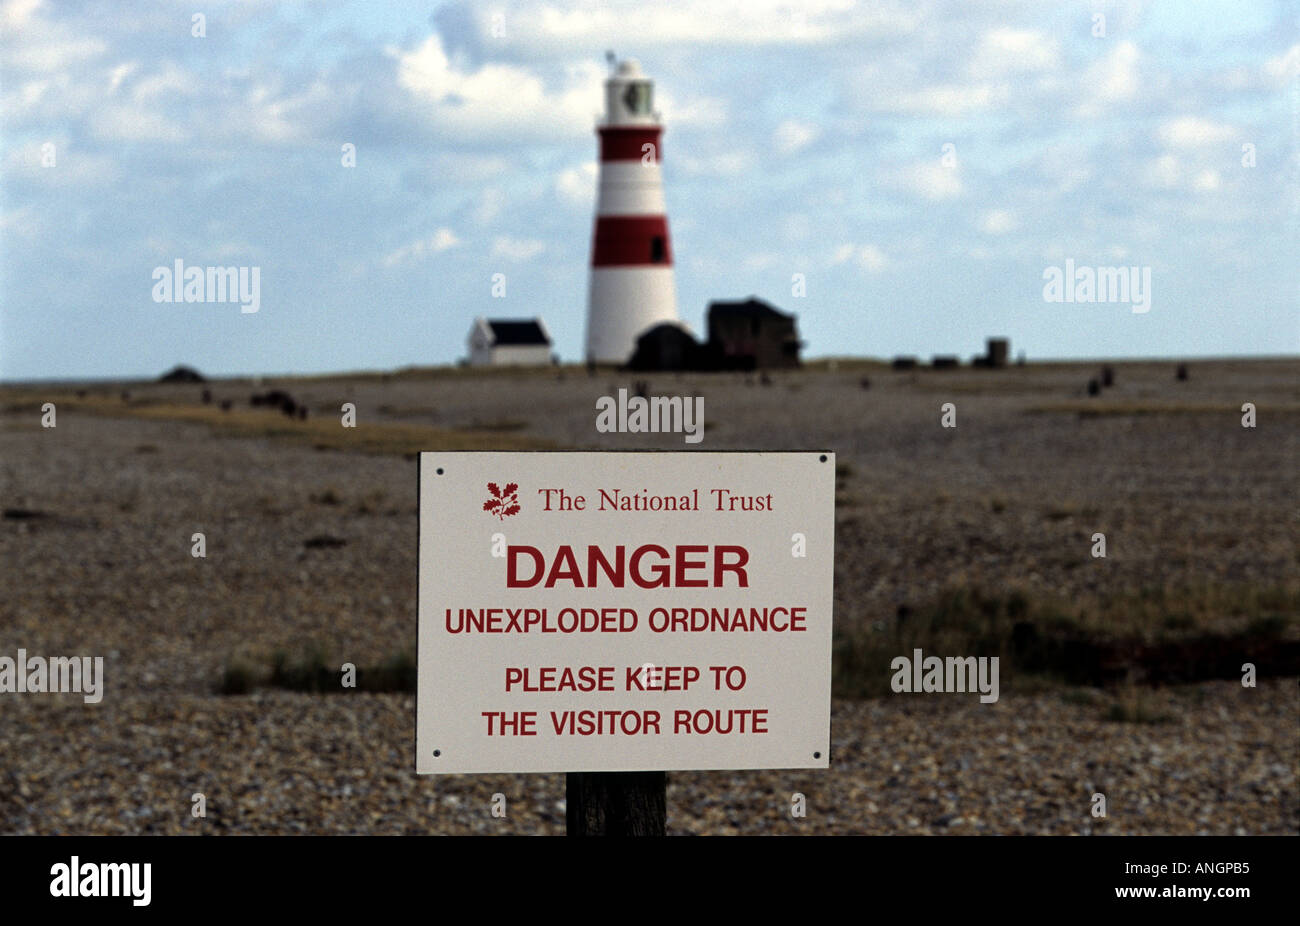 National Trust sign warning of unexploded ordnance, Orfordness, Suffolk, UK. Stock Photo